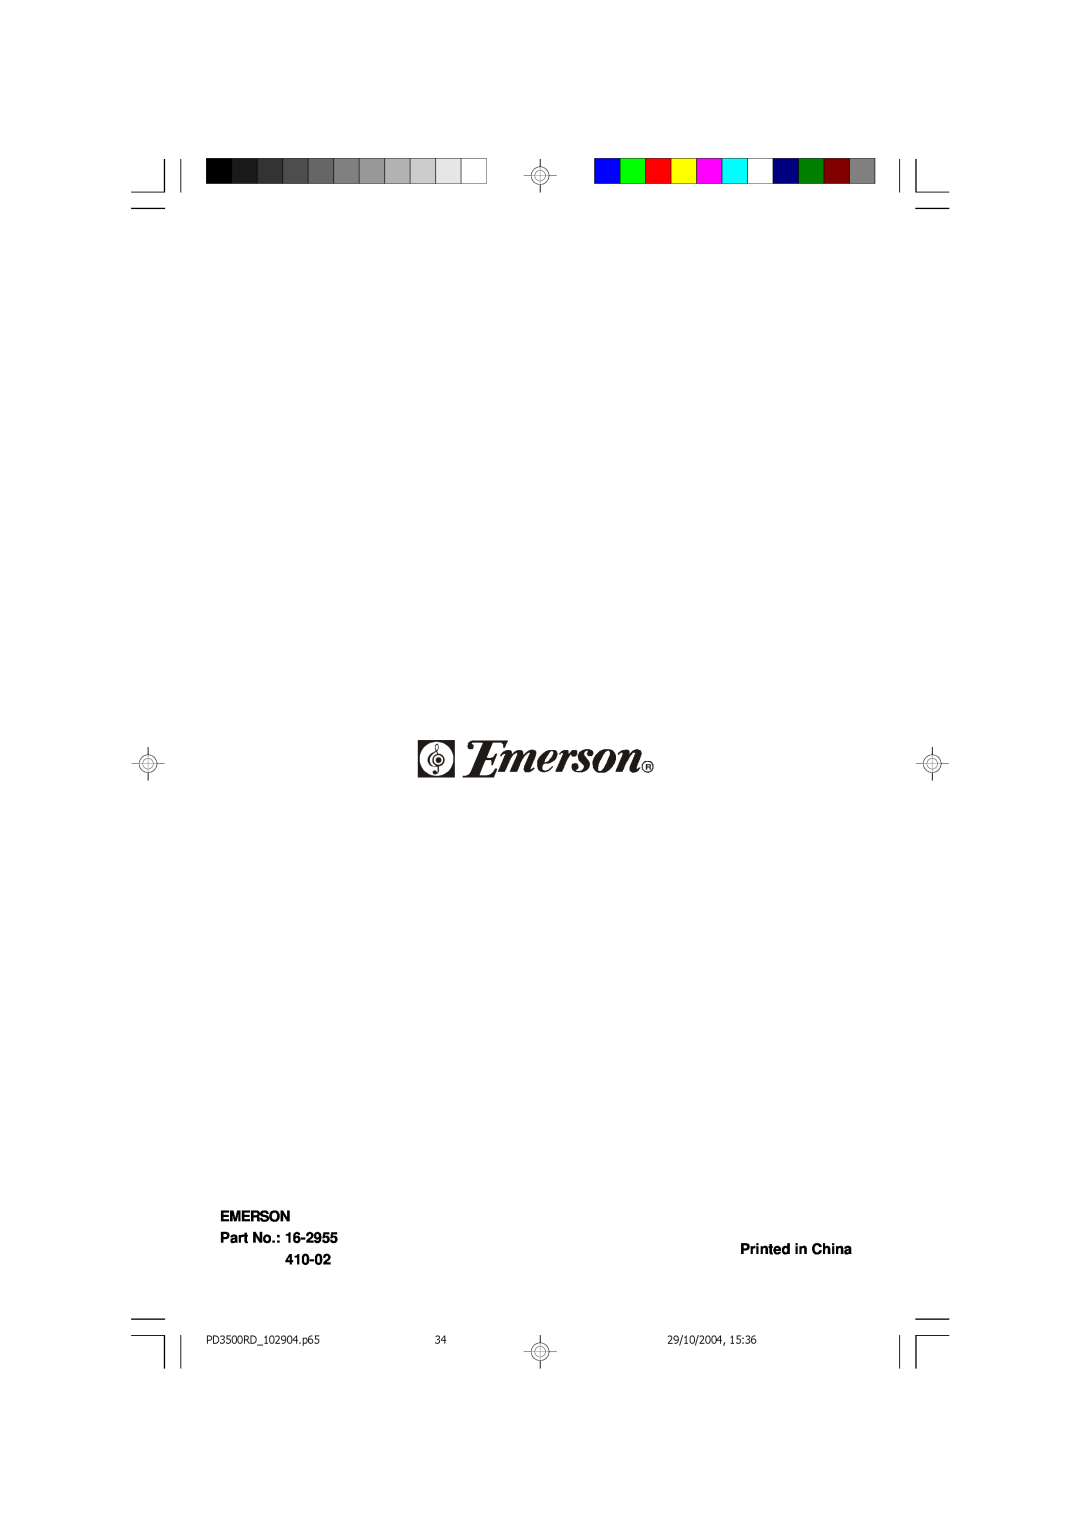 Emerson owner manual EMERSON Part No, 410-02, PD3500RD_102904.p65, 29/10/2004 